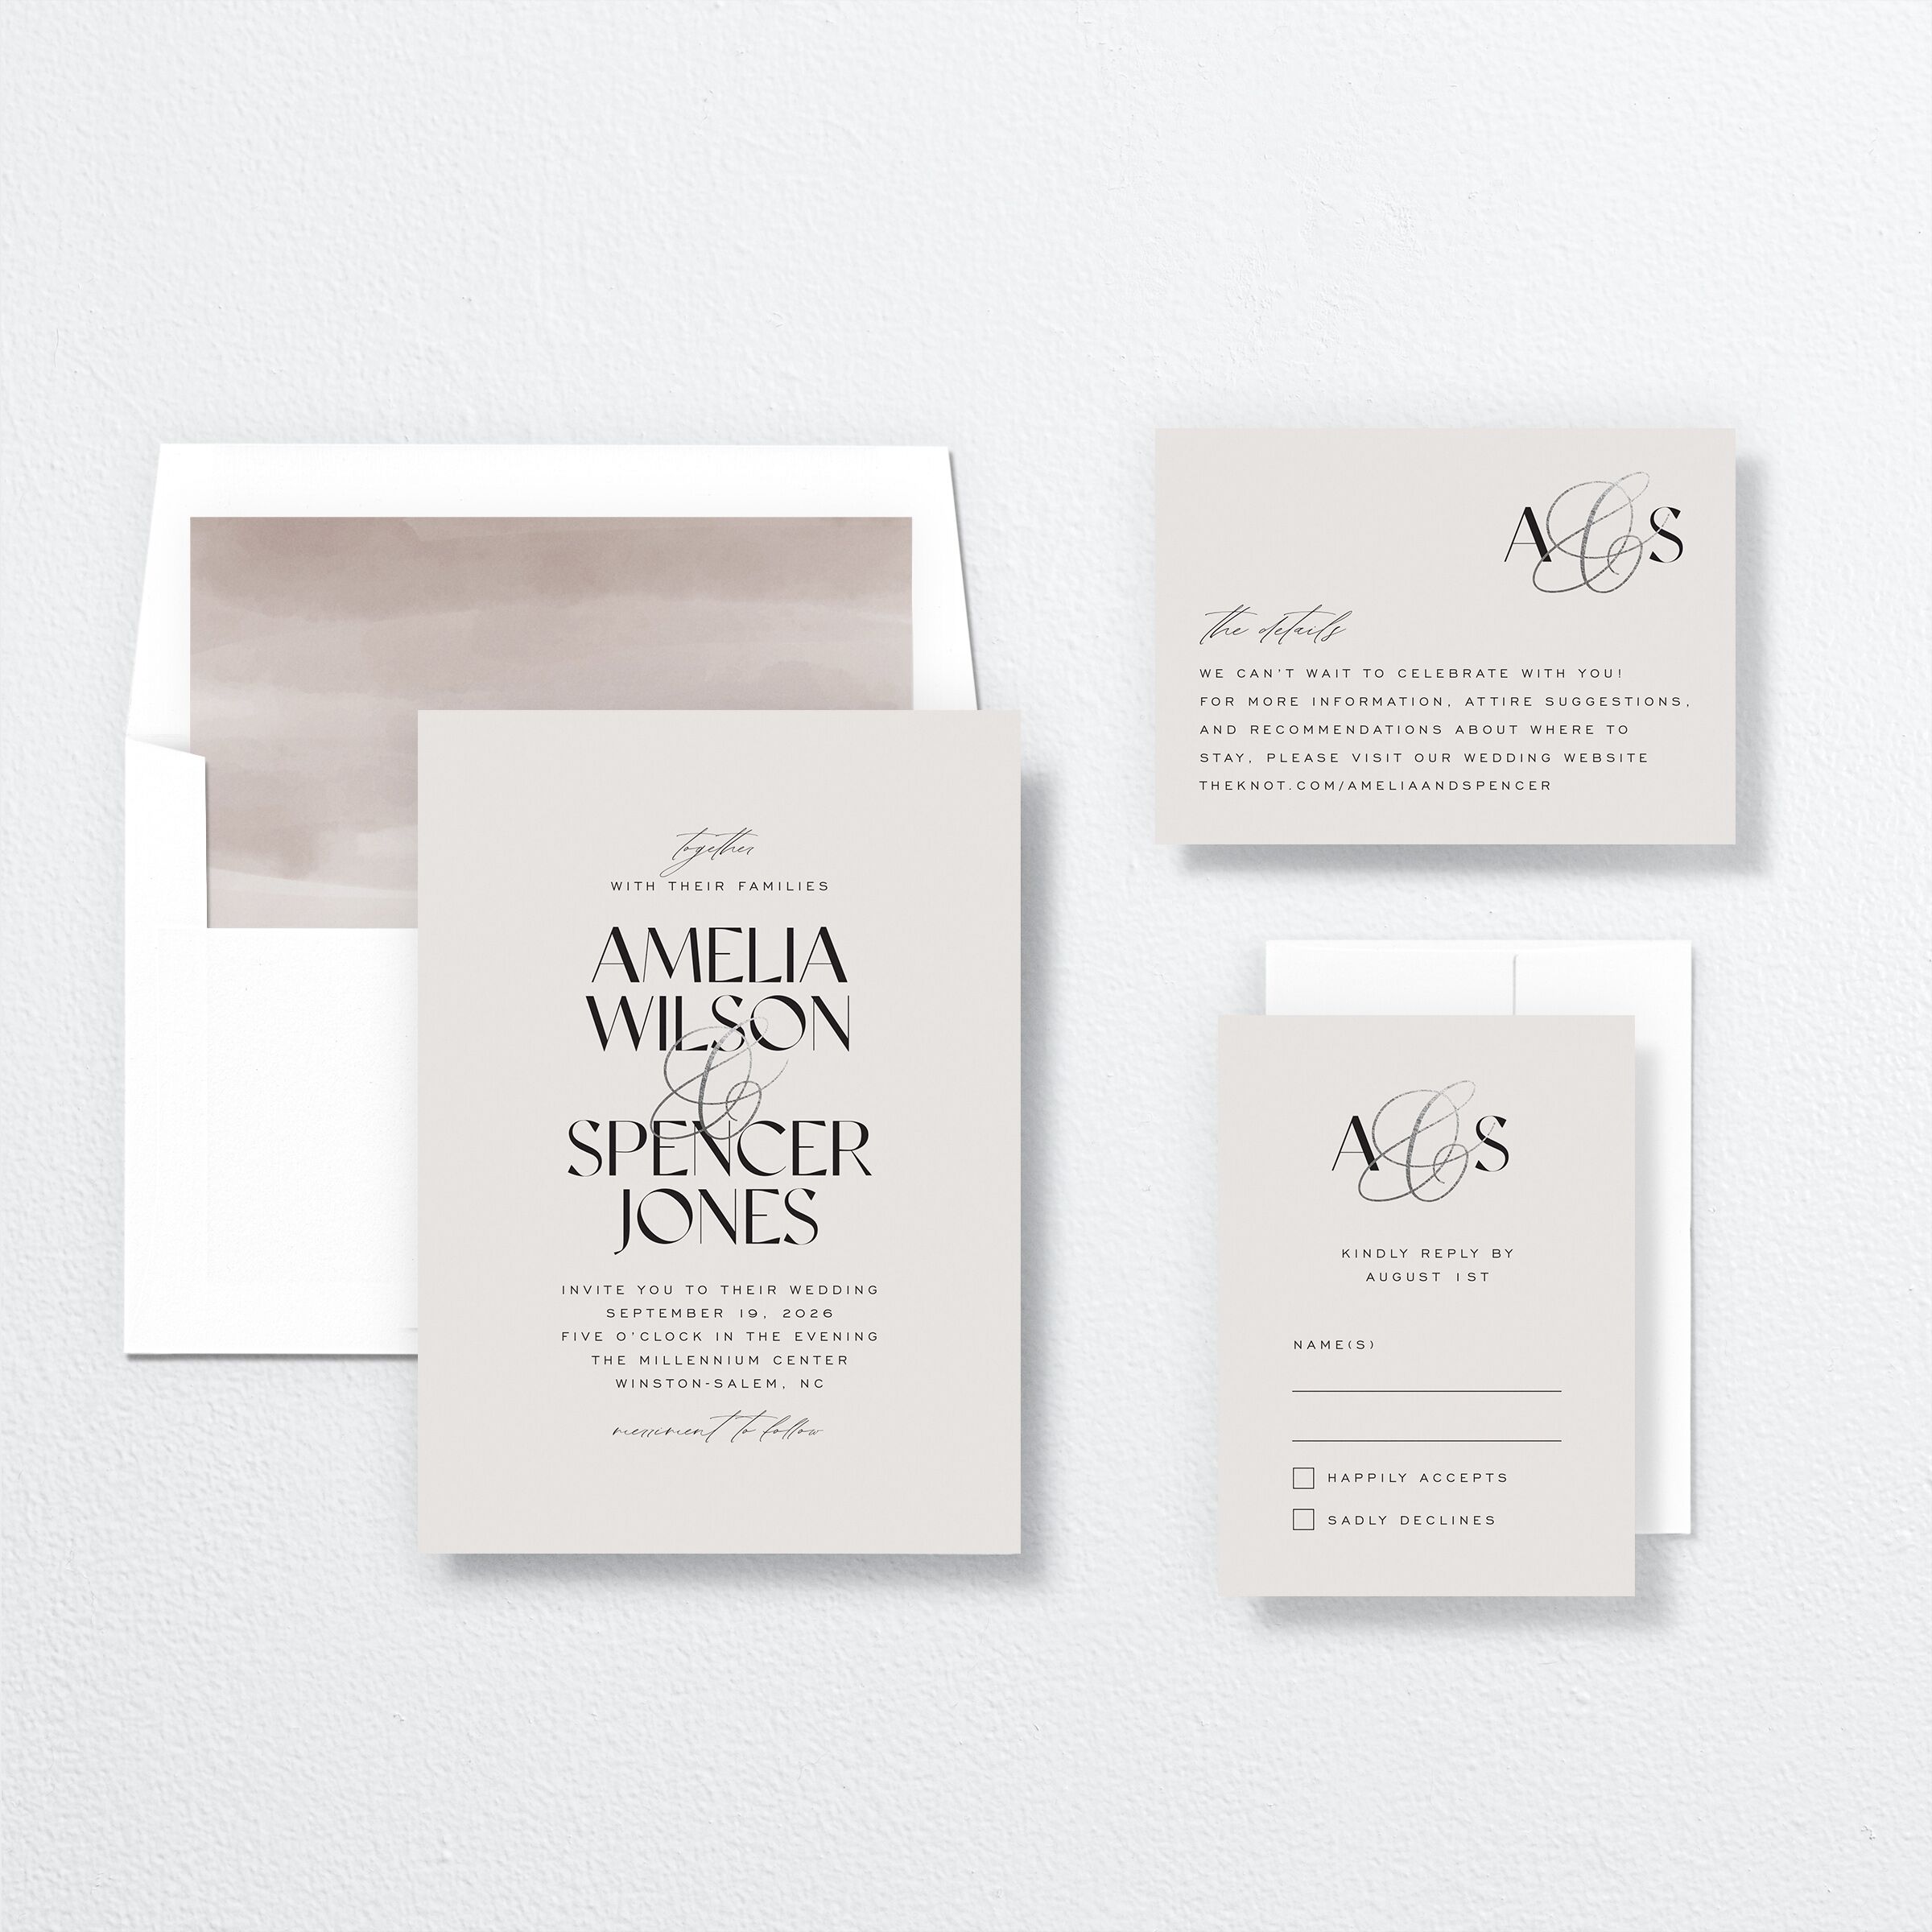 Together Wedding Invitations | The Knot